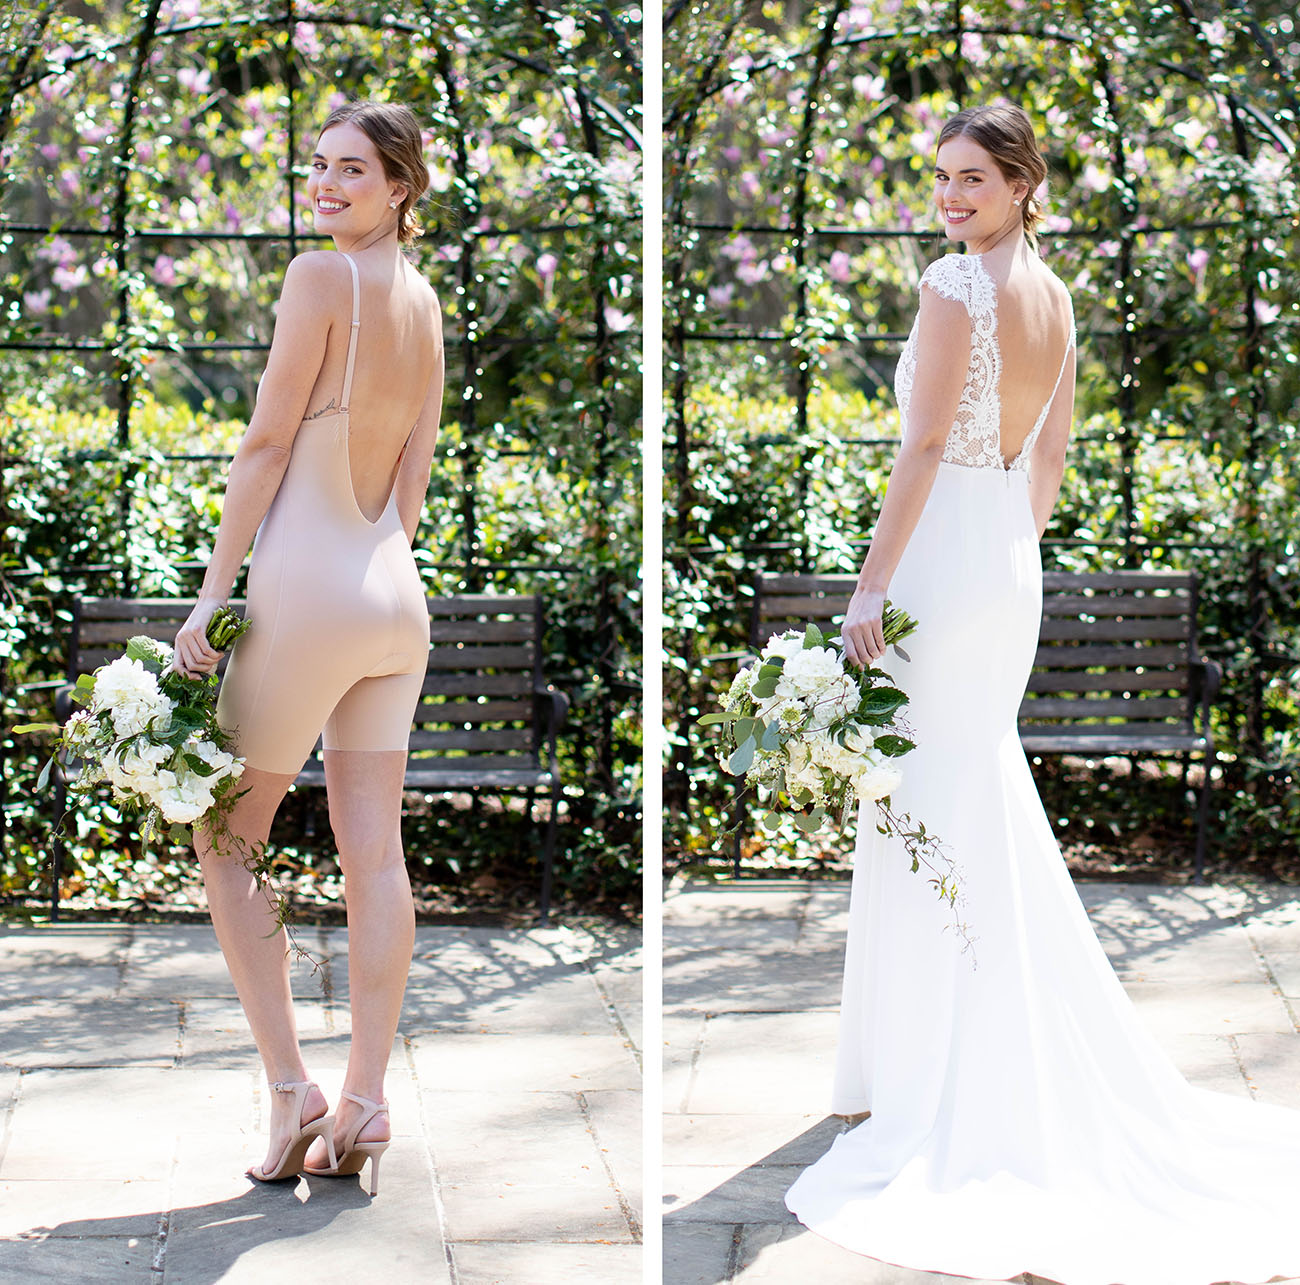 Regan Assumptions, assumptions. Guess Outdoor What Do You Wear Under Your Wedding Dress? Spanx Has the Support You Need!  - Green Wedding Shoes